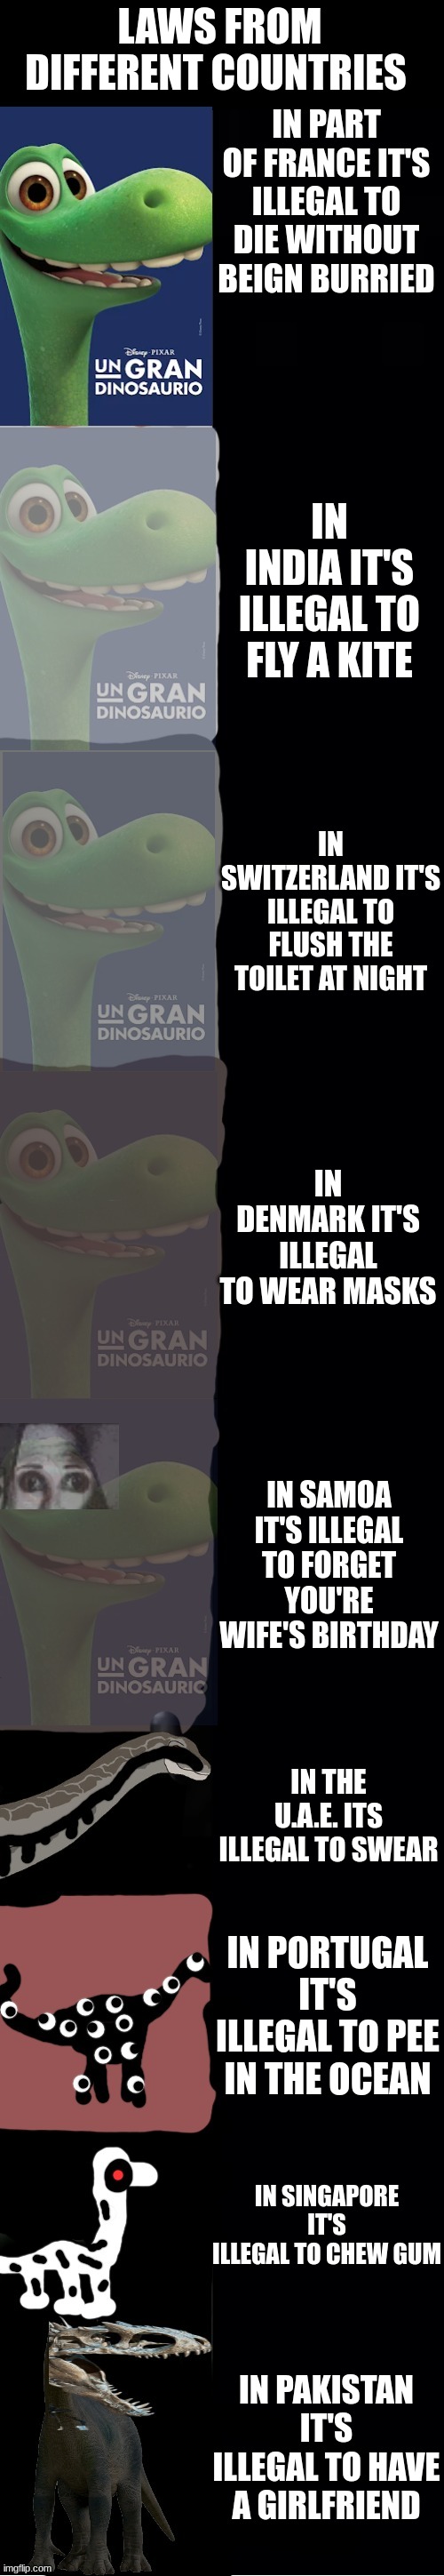 Arlo becoming uncanny: Laws from different countries | LAWS FROM DIFFERENT COUNTRIES; IN PART OF FRANCE IT'S ILLEGAL TO DIE WITHOUT BEIGN BURRIED; IN INDIA IT'S ILLEGAL TO FLY A KITE; IN SWITZERLAND IT'S ILLEGAL TO FLUSH THE TOILET AT NIGHT; IN DENMARK IT'S ILLEGAL TO WEAR MASKS; IN SAMOA IT'S ILLEGAL TO FORGET YOU'RE WIFE'S BIRTHDAY; IN THE U.A.E. ITS ILLEGAL TO SWEAR; IN PORTUGAL IT'S ILLEGAL TO PEE IN THE OCEAN; IN SINGAPORE IT'S ILLEGAL TO CHEW GUM; IN PAKISTAN IT'S ILLEGAL TO HAVE A GIRLFRIEND | image tagged in arlo becoming uncanny v 0 0 | made w/ Imgflip meme maker